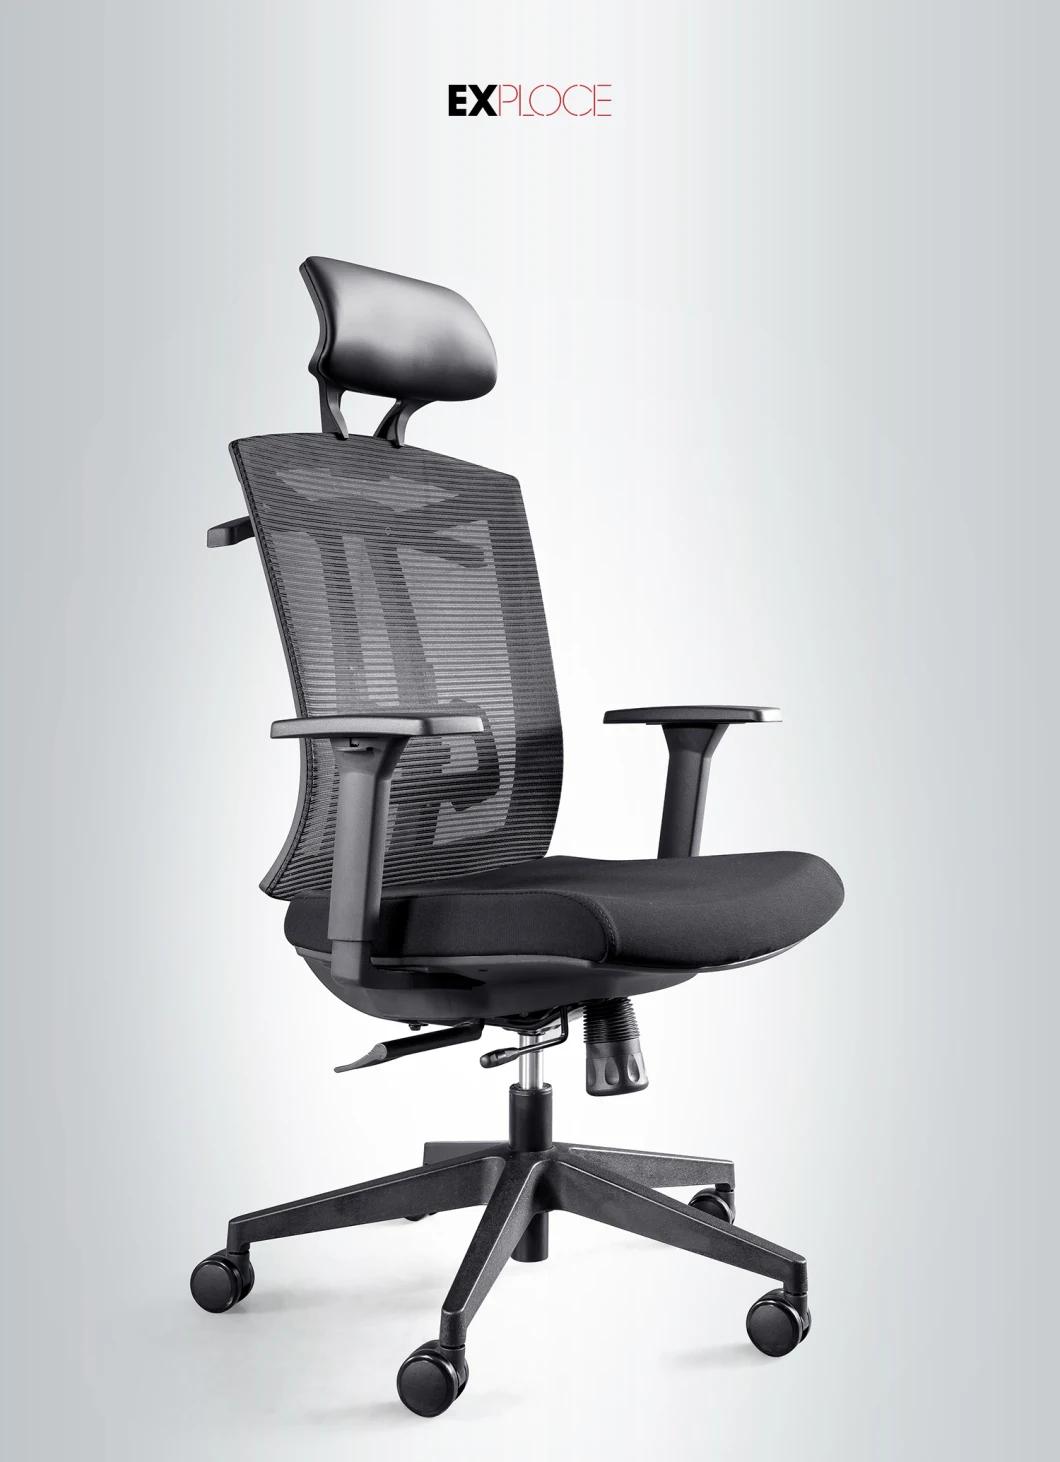 High Quality PA+Fiber Glass with Armrest Revolving Chair Office Chairs Laptop Mesh